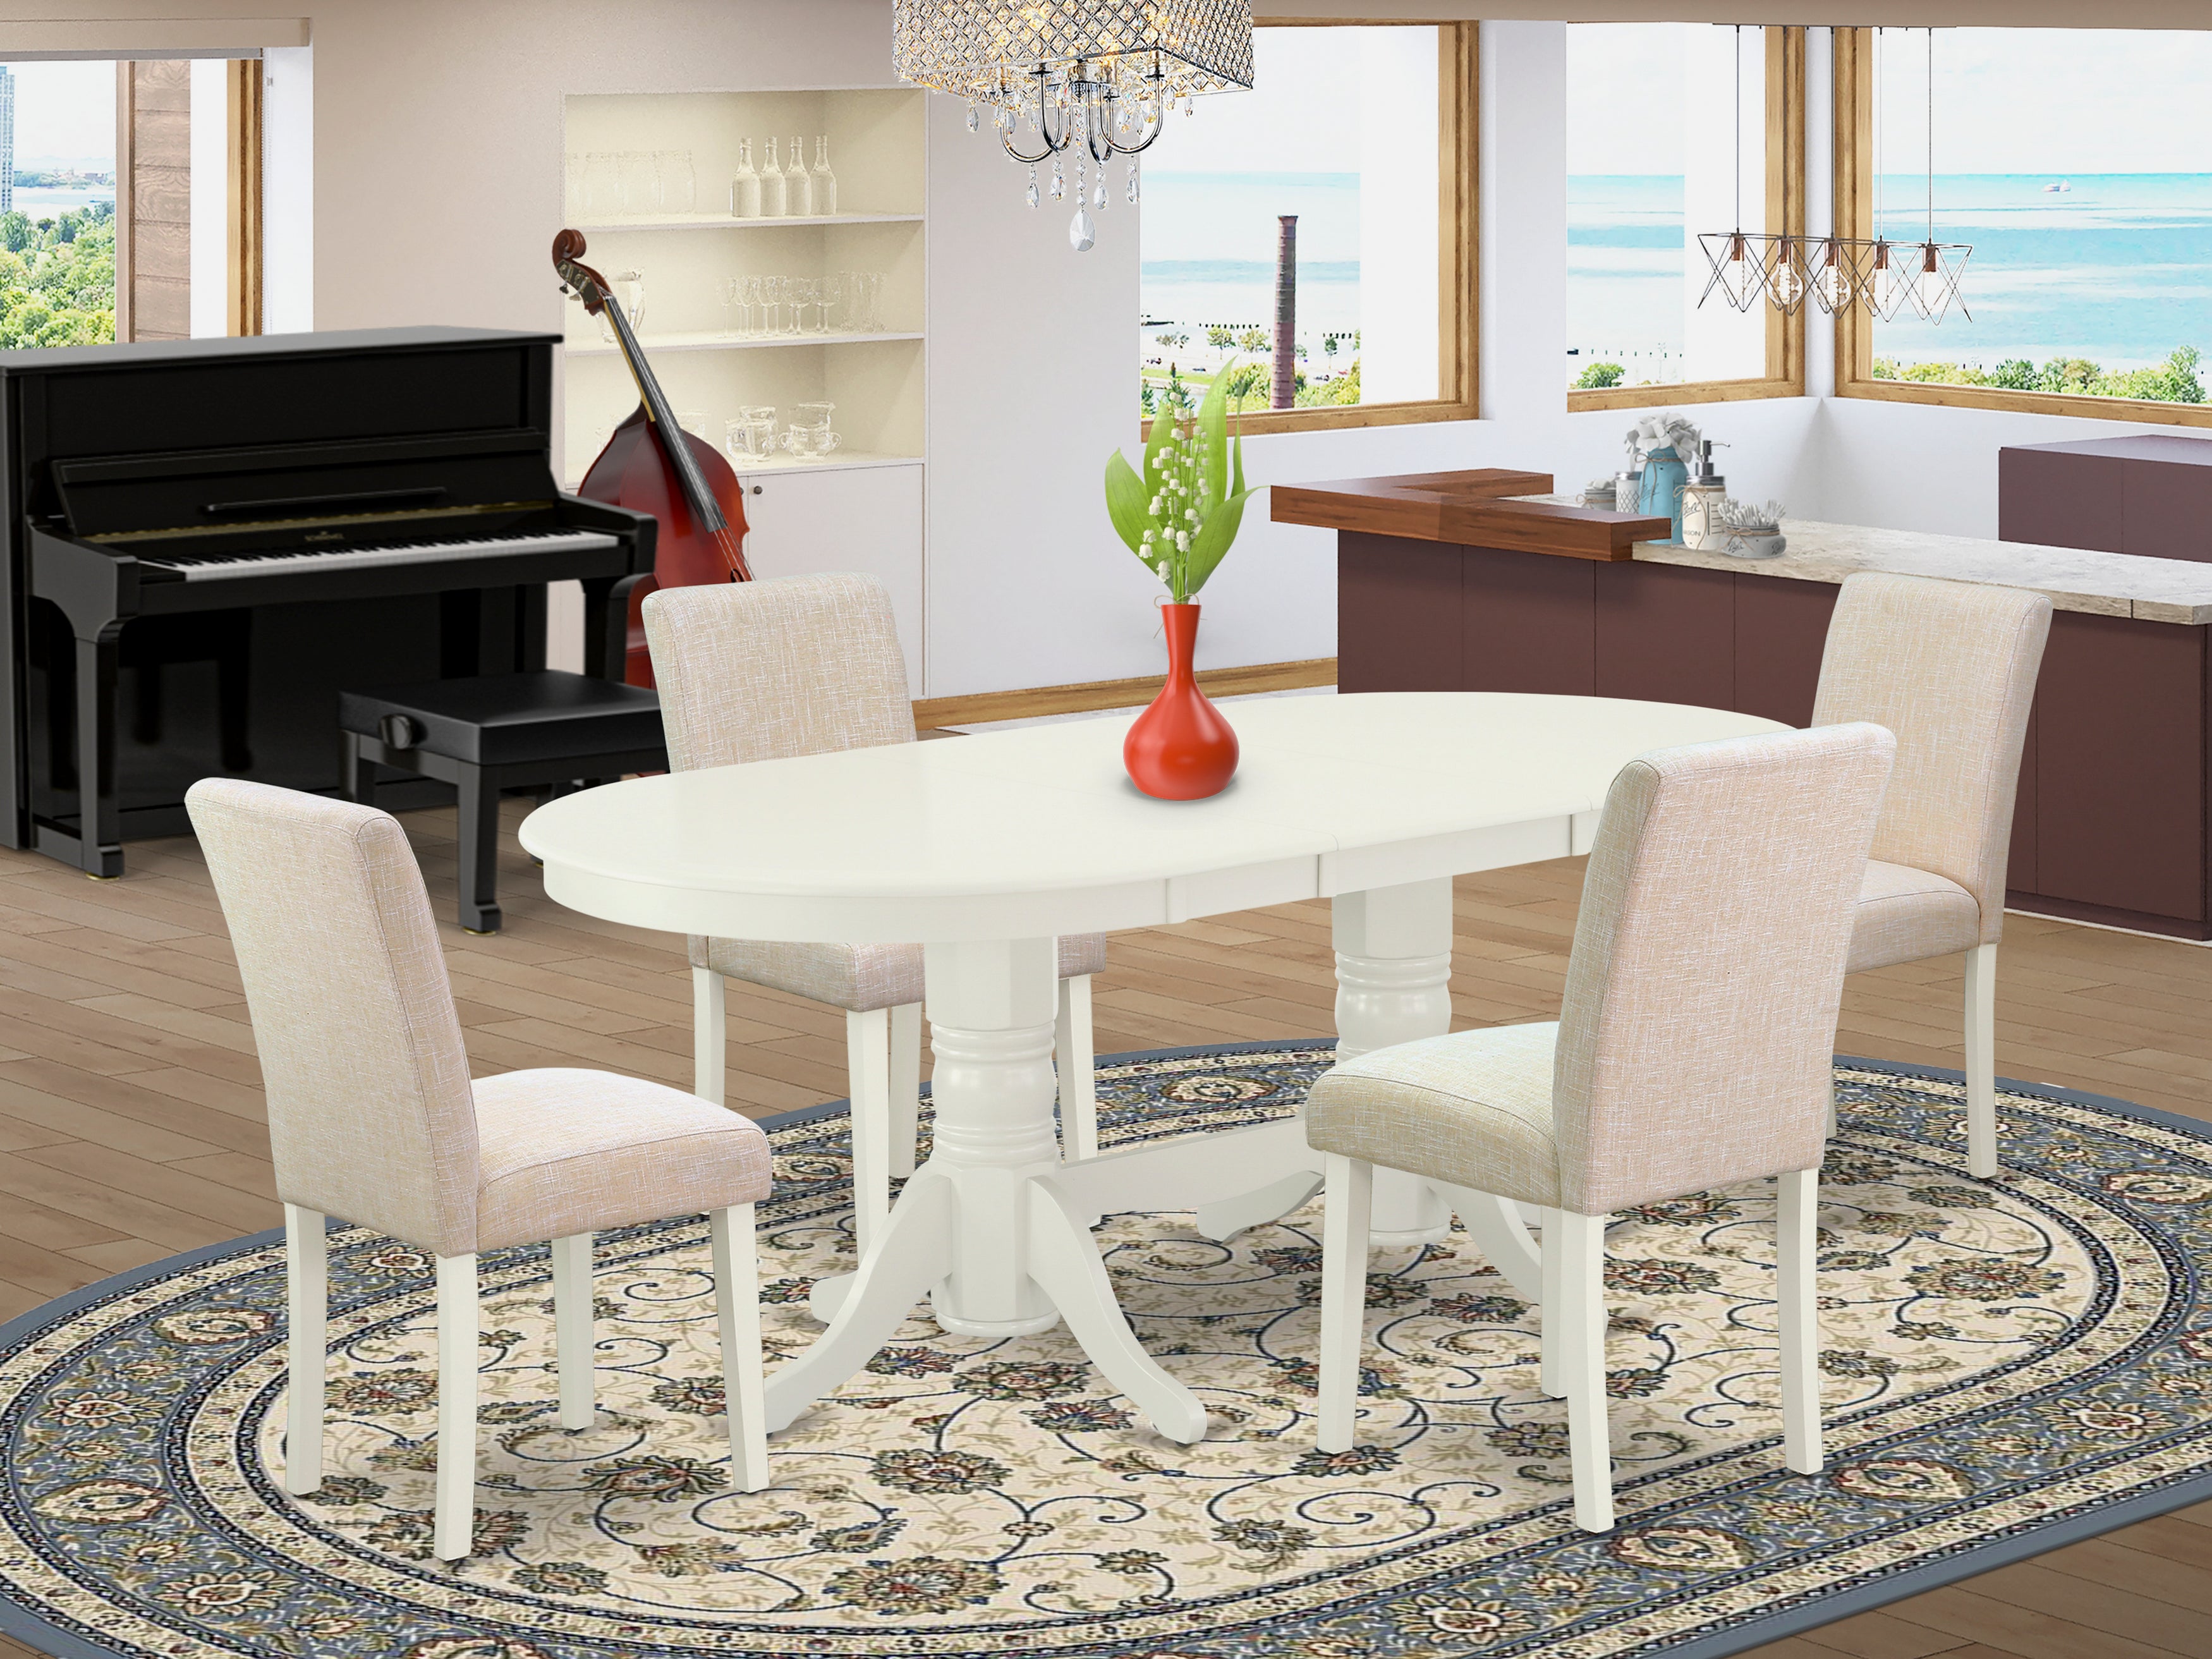 5 Pc Dining Room Oval Butterfly Table and Chairs Set in White and Beige